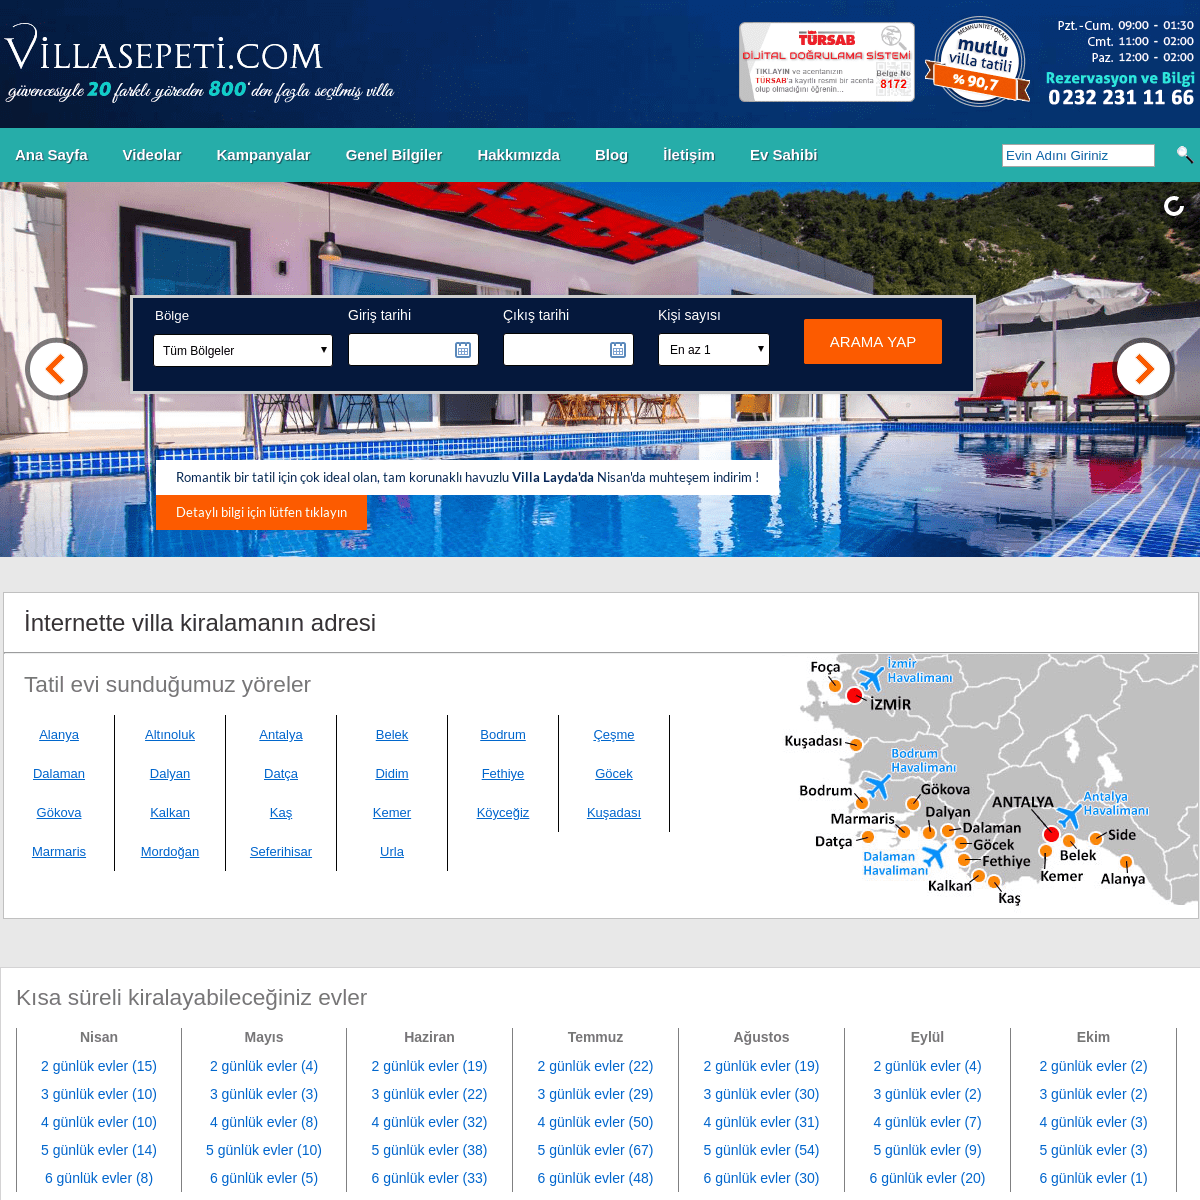 A complete backup of villasepeti.com